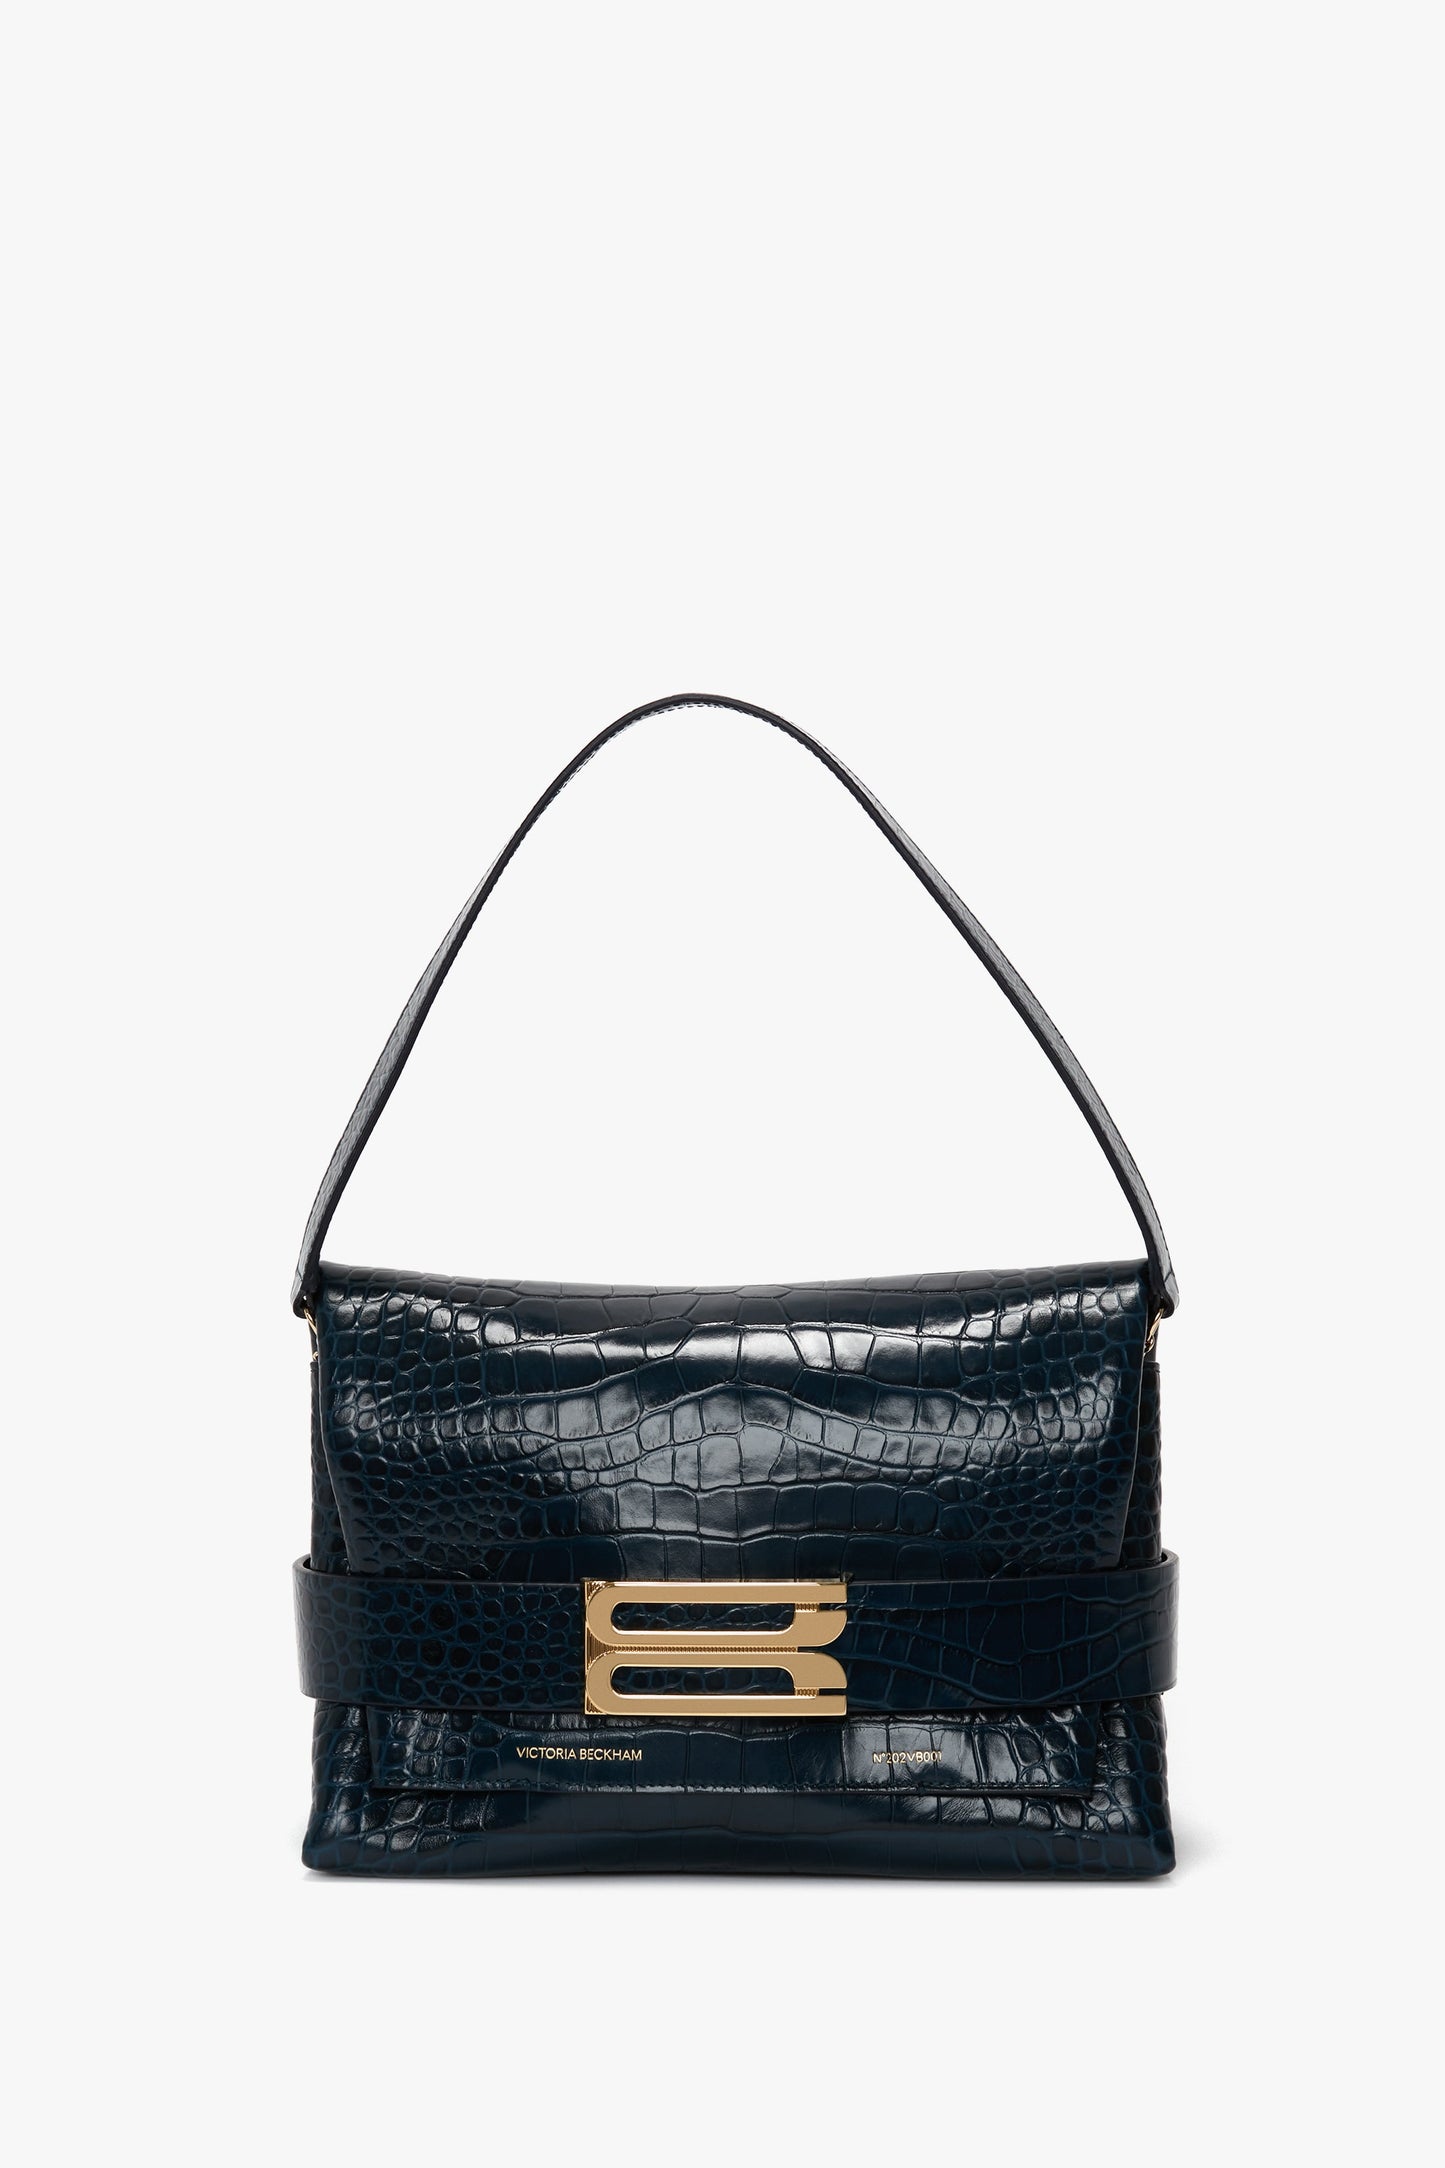 Victoria Beckham B Pouch Bag In Croc Effect Midnight Blue Leather with gold clasp and a single strap.